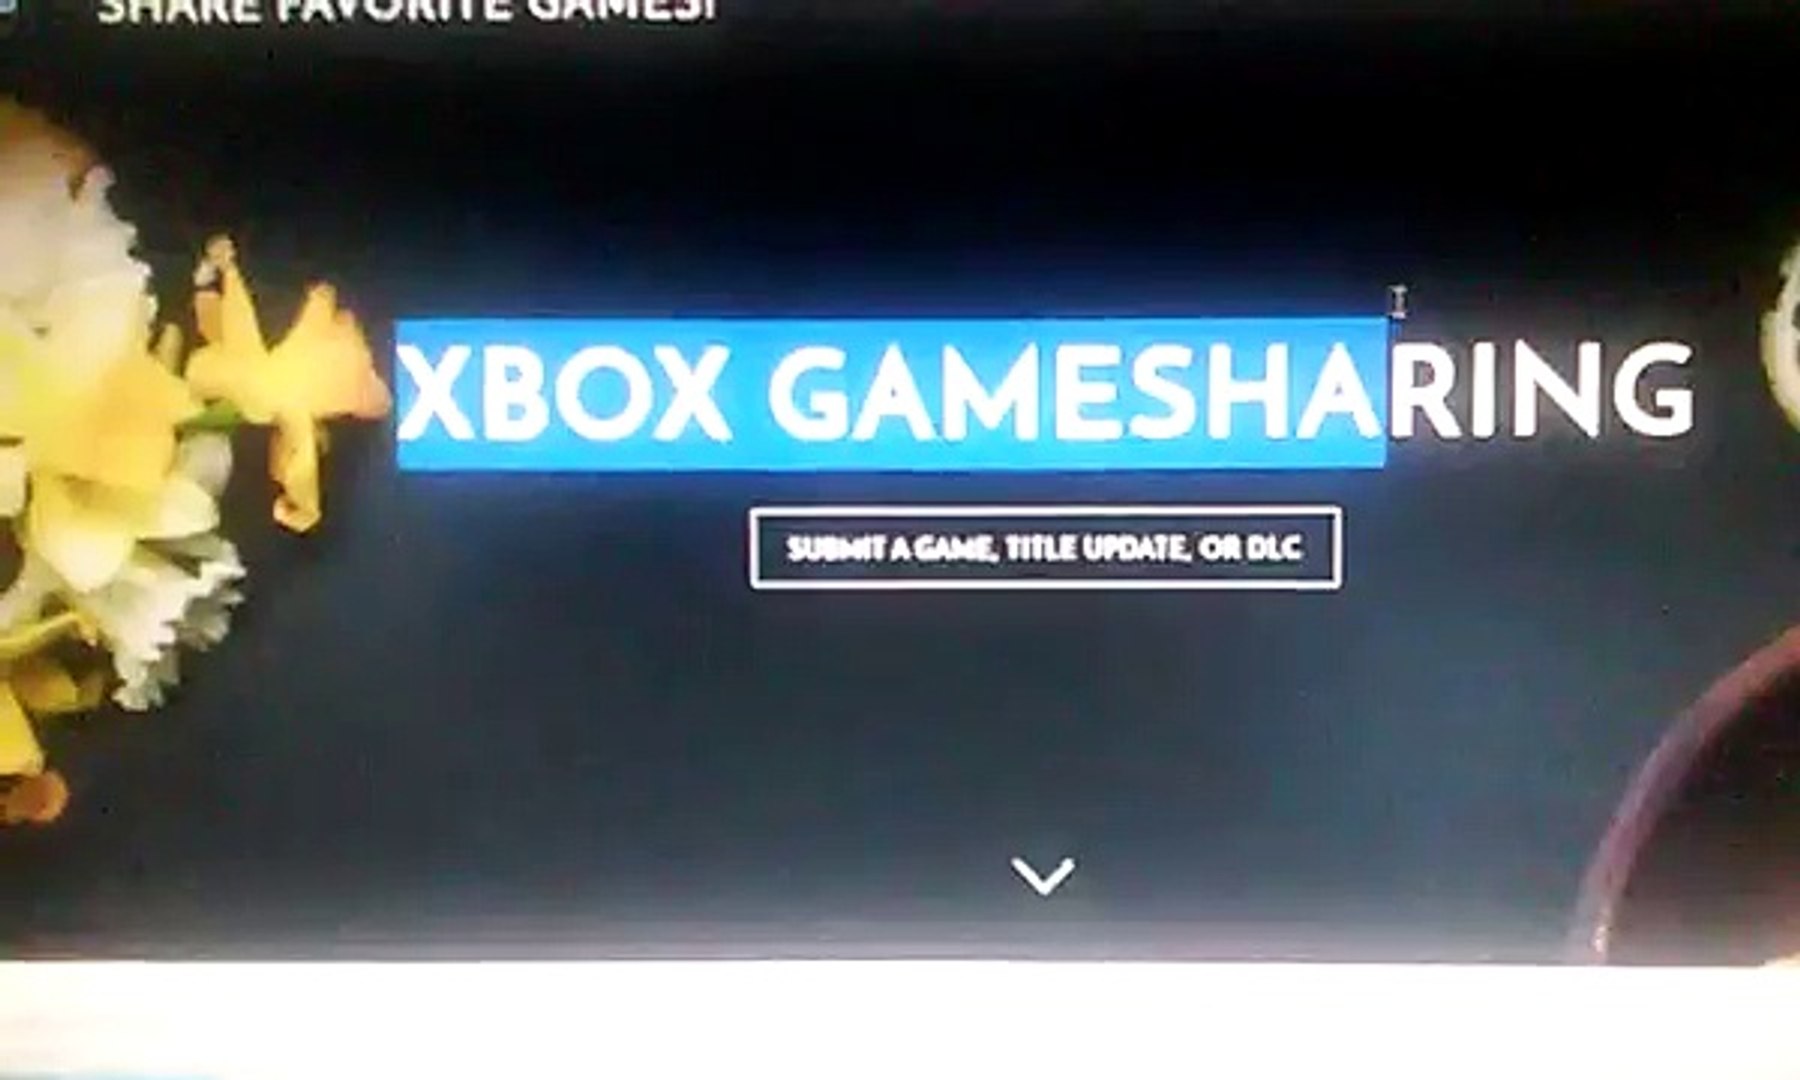 GET FREE XBOX 360 GAMES, DLC, TITLE UPDATES NO JTAG! - video Dailymotion